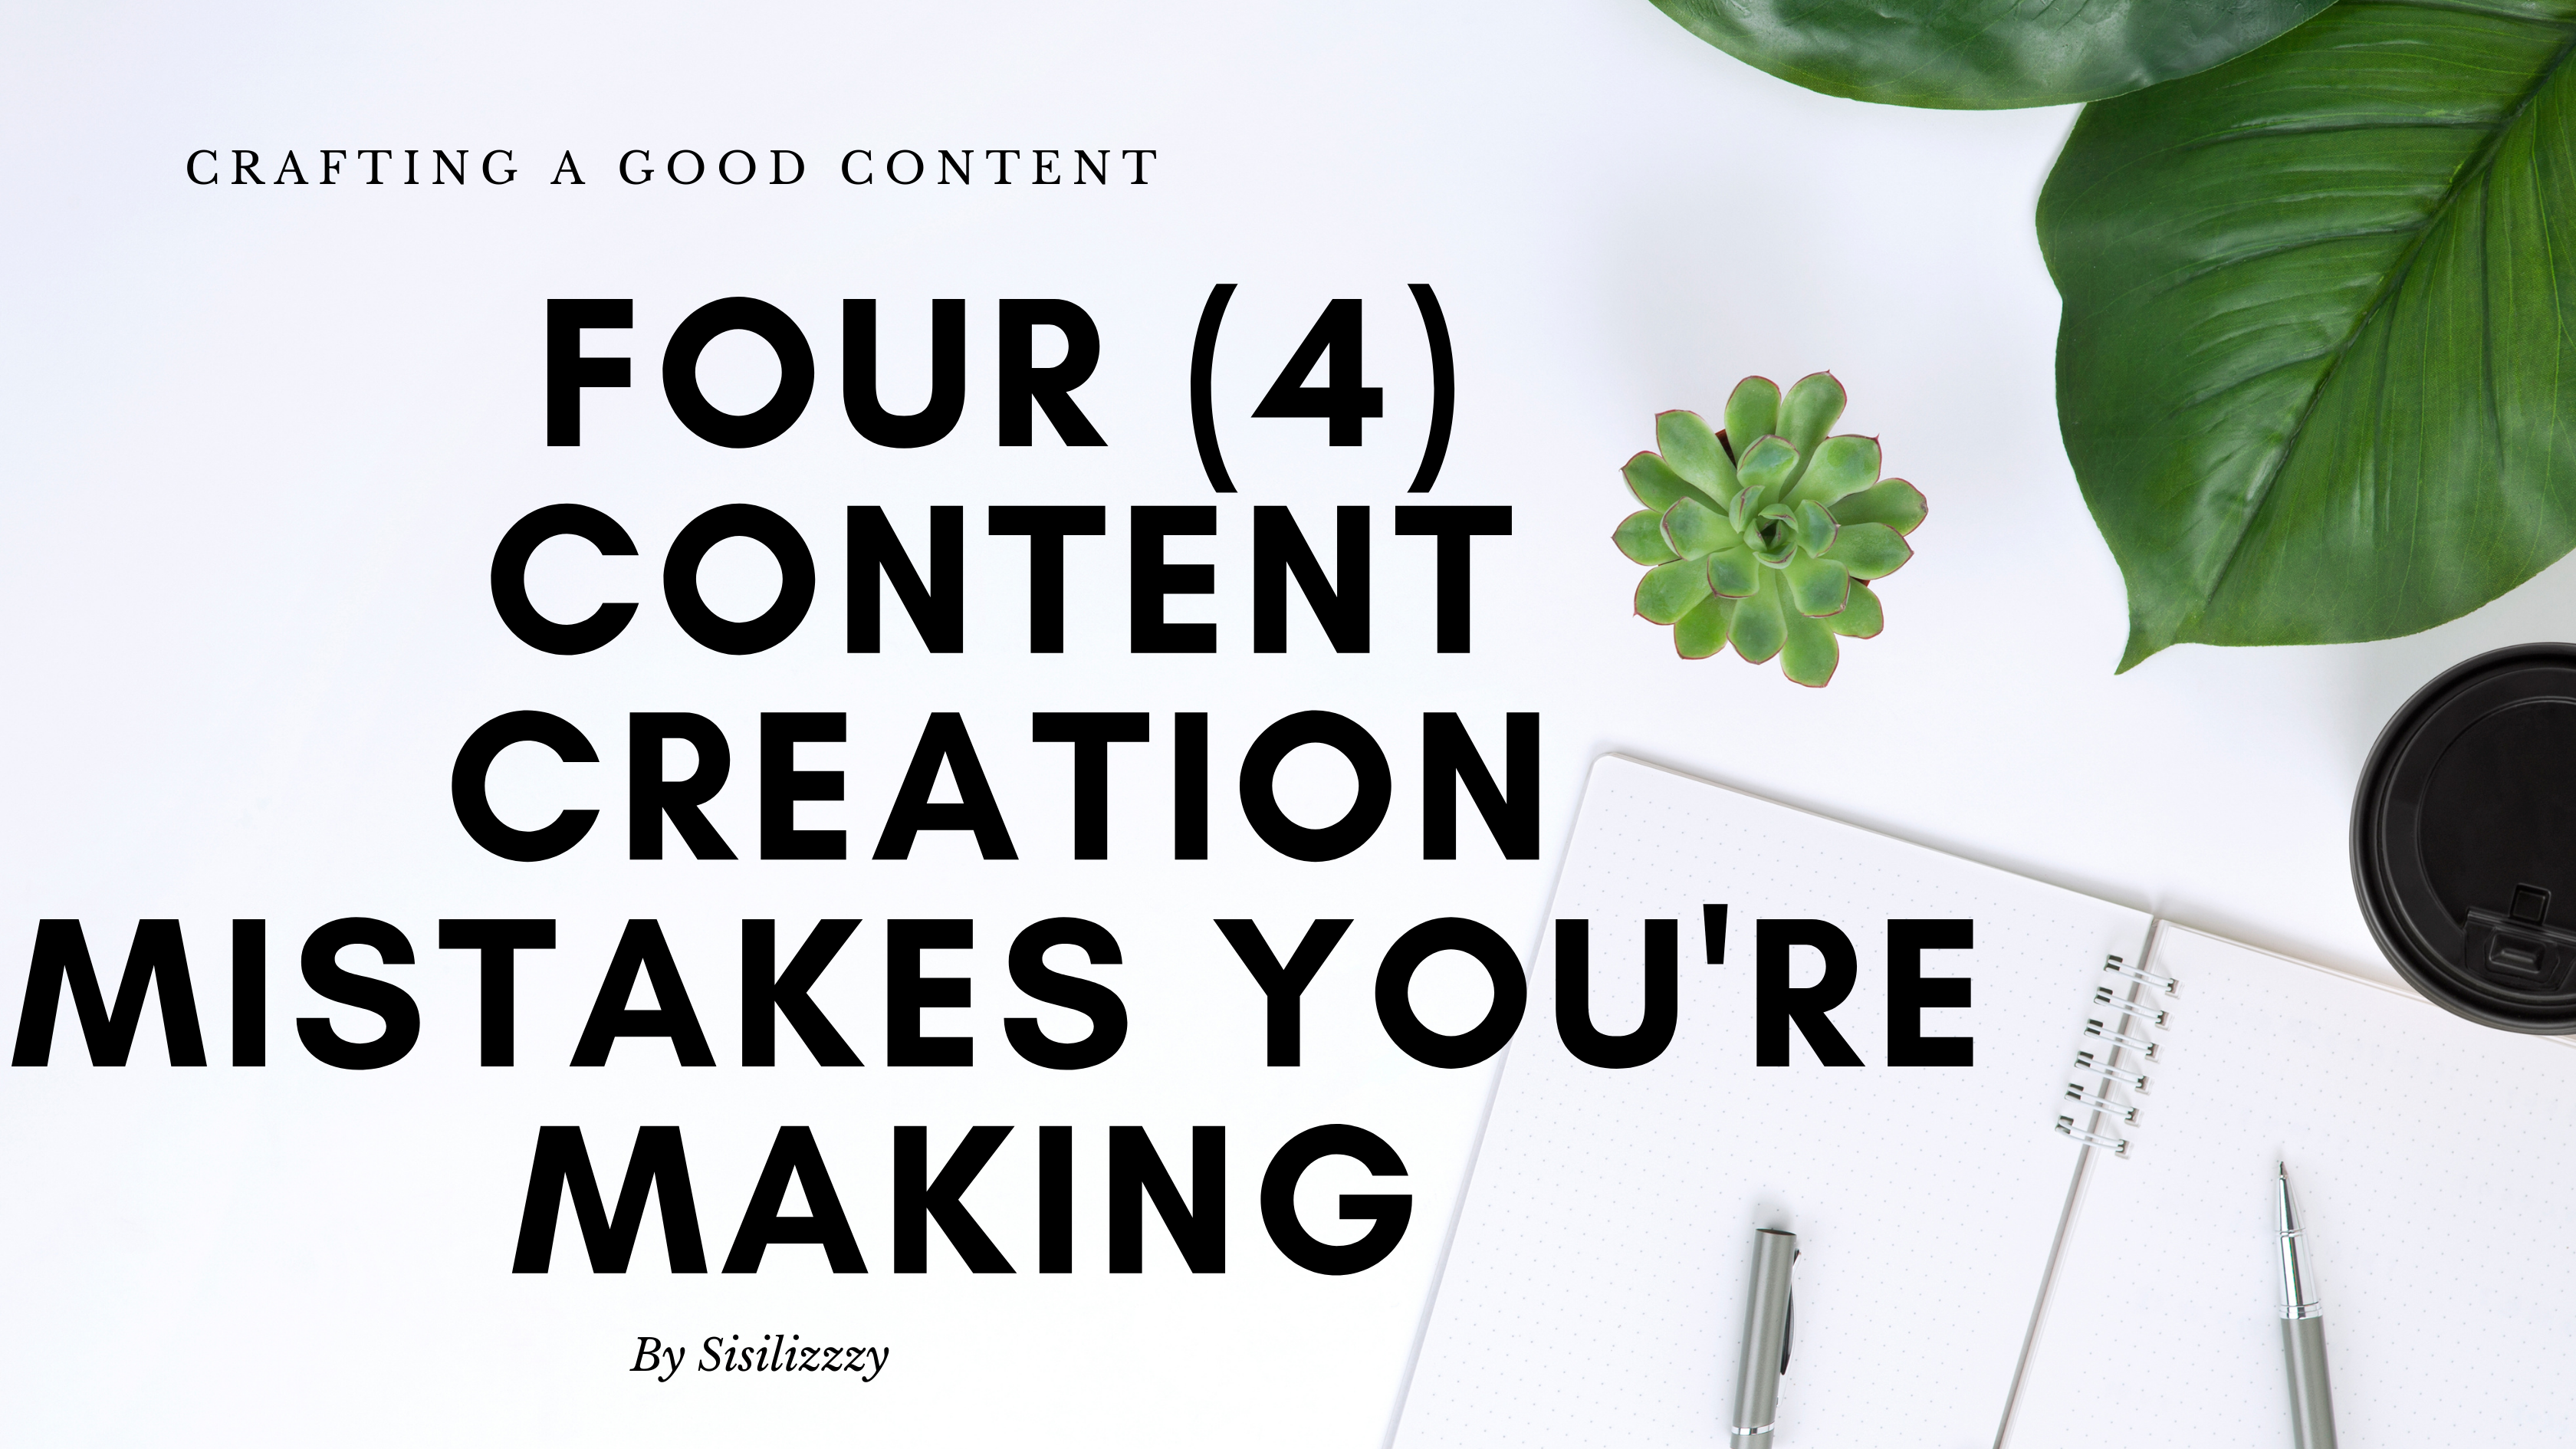 Four (4) Content Creation Mistakes You're Making No.3 is very Important